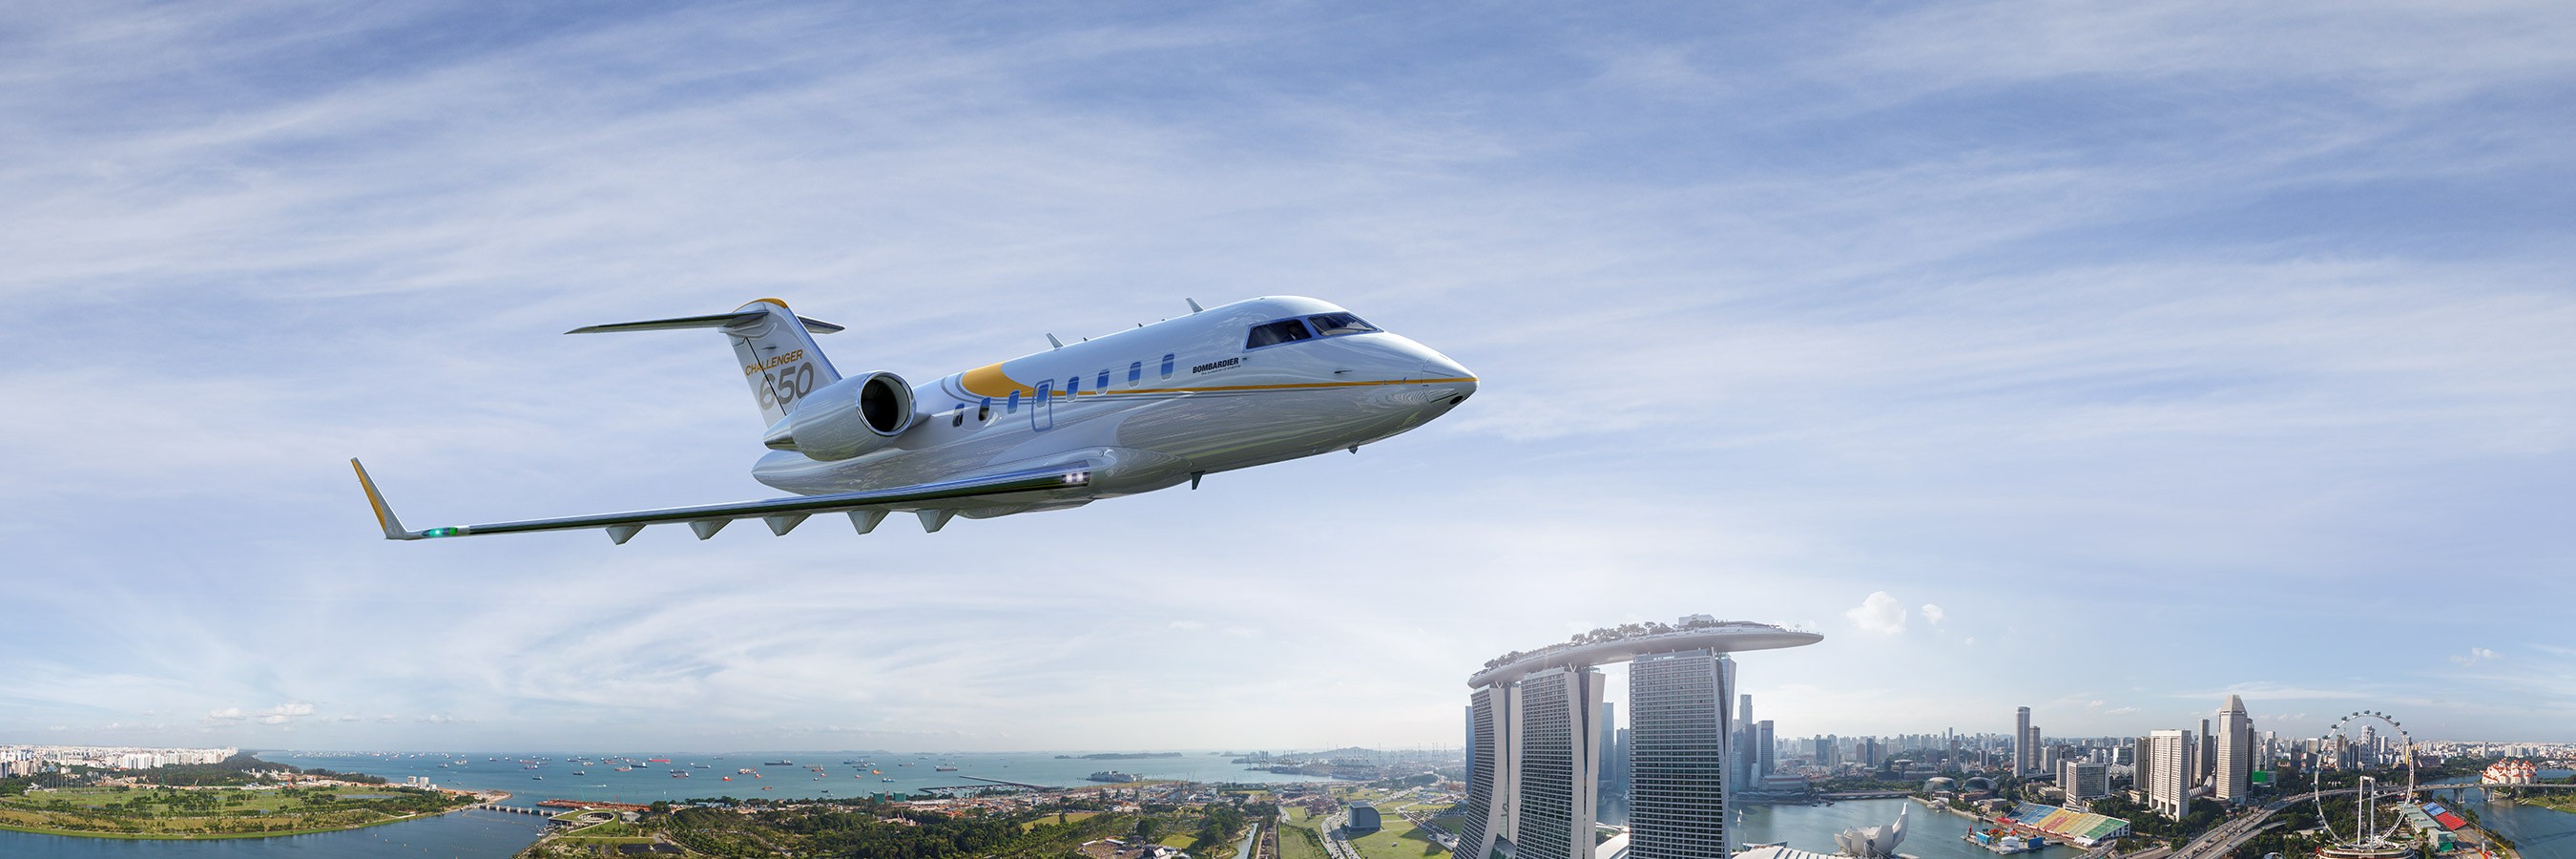 Challenger 650 Nothing less than extraordinary